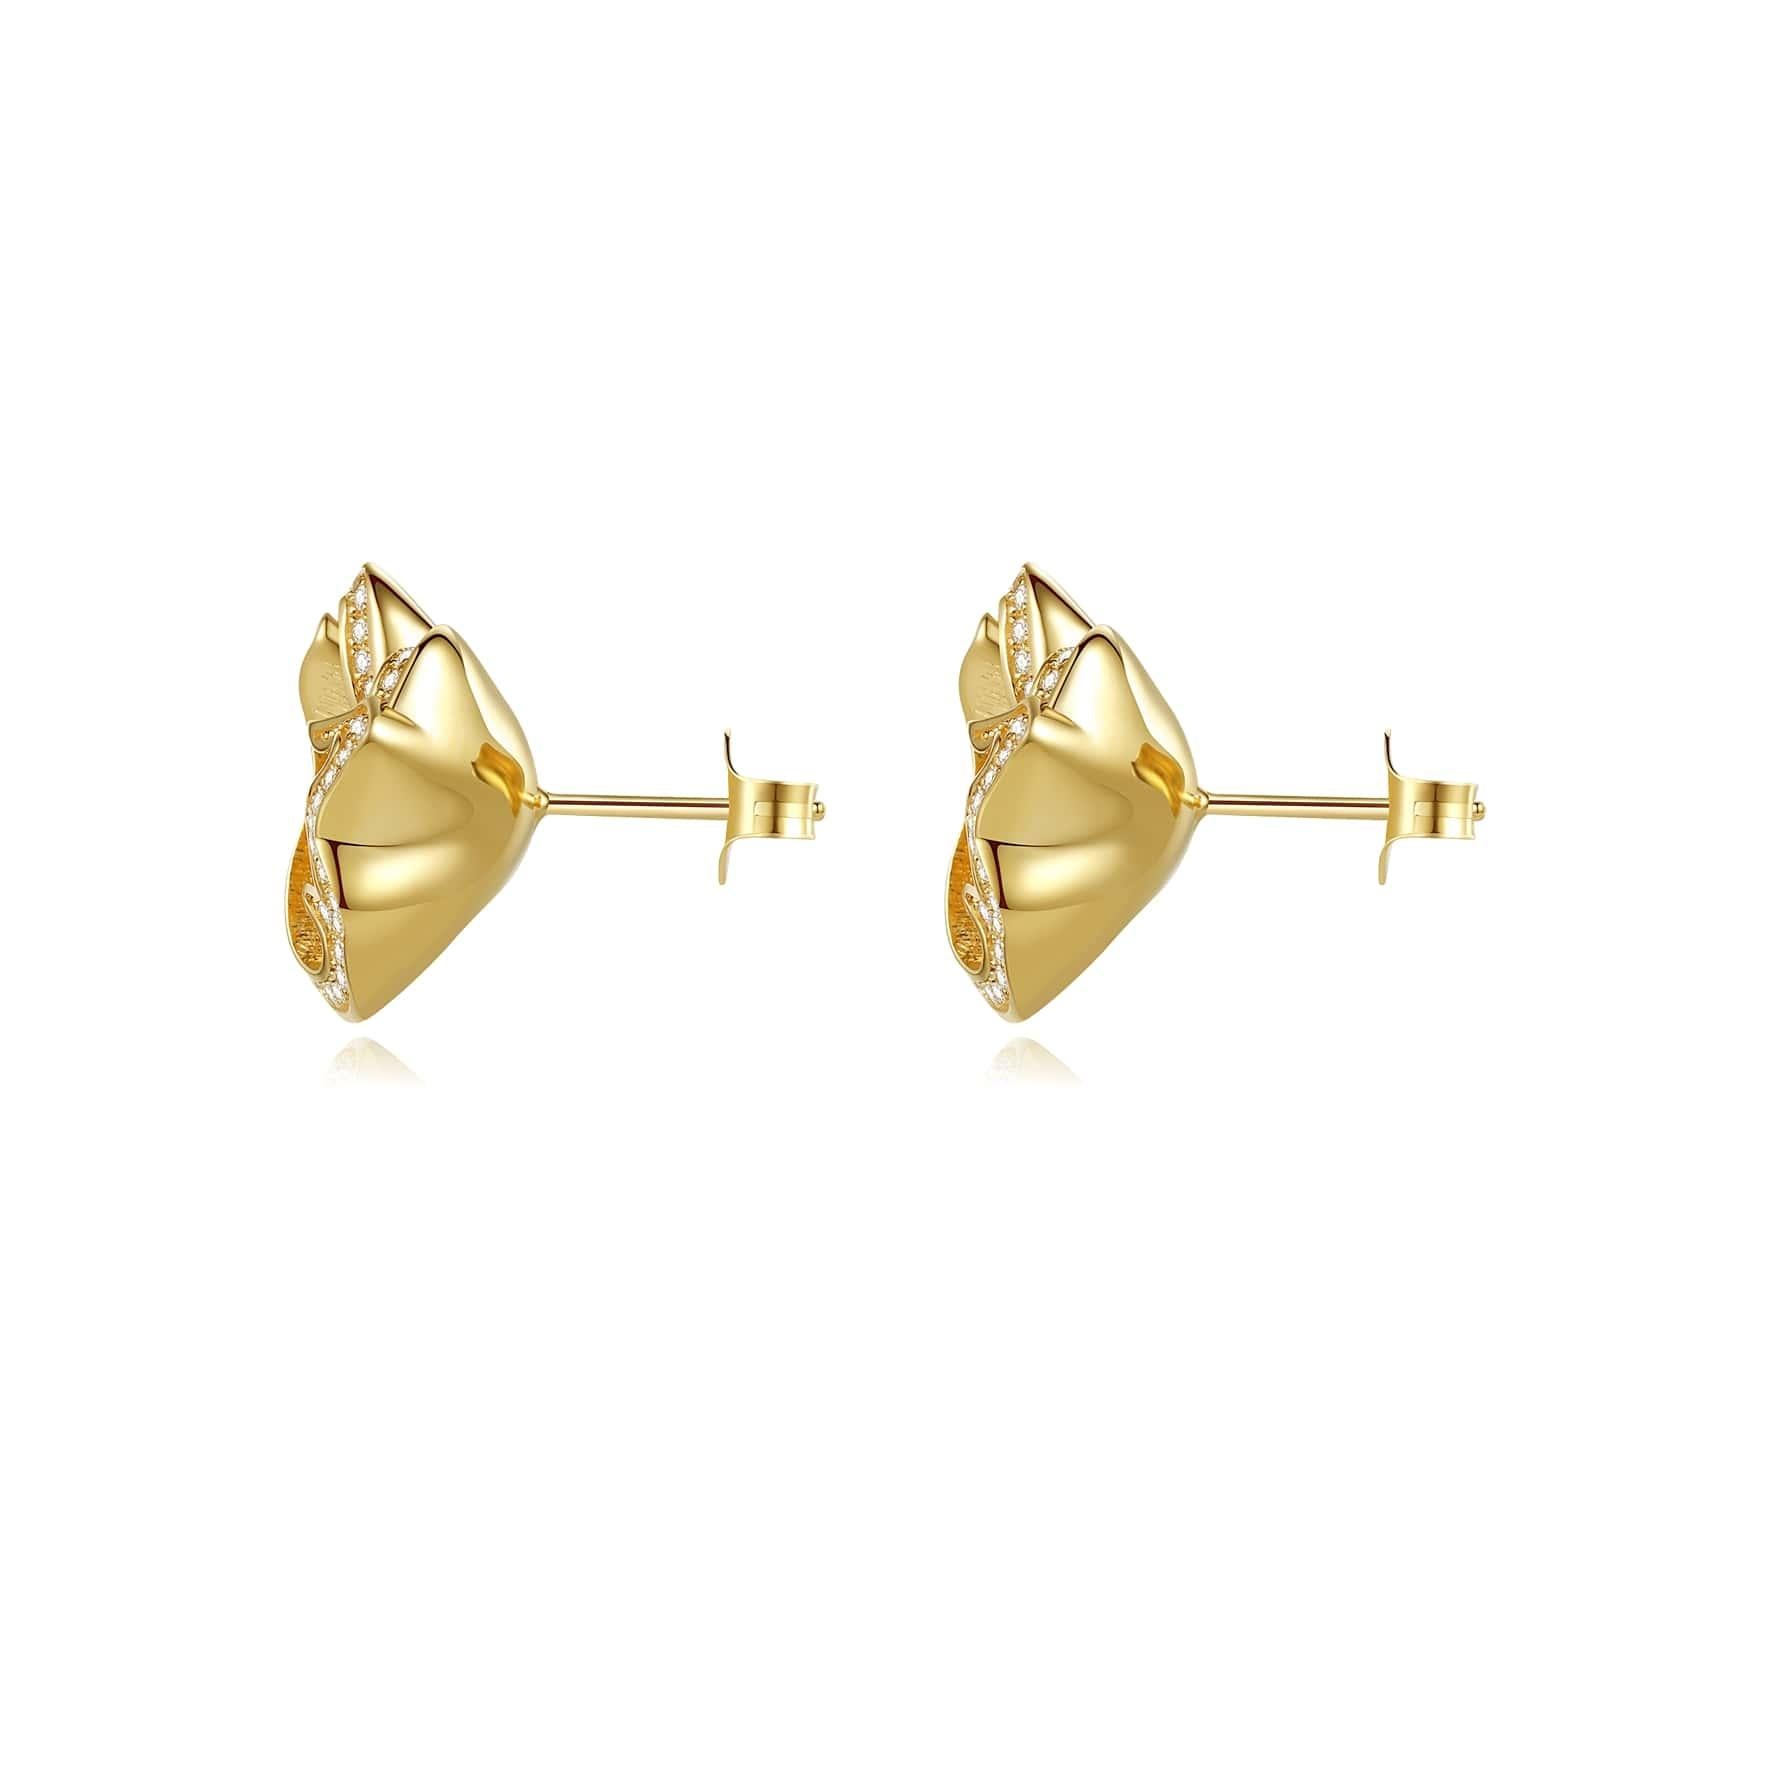 Quintessence Gold Small Flower Ear Stud In New Condition For Sale In London, GB